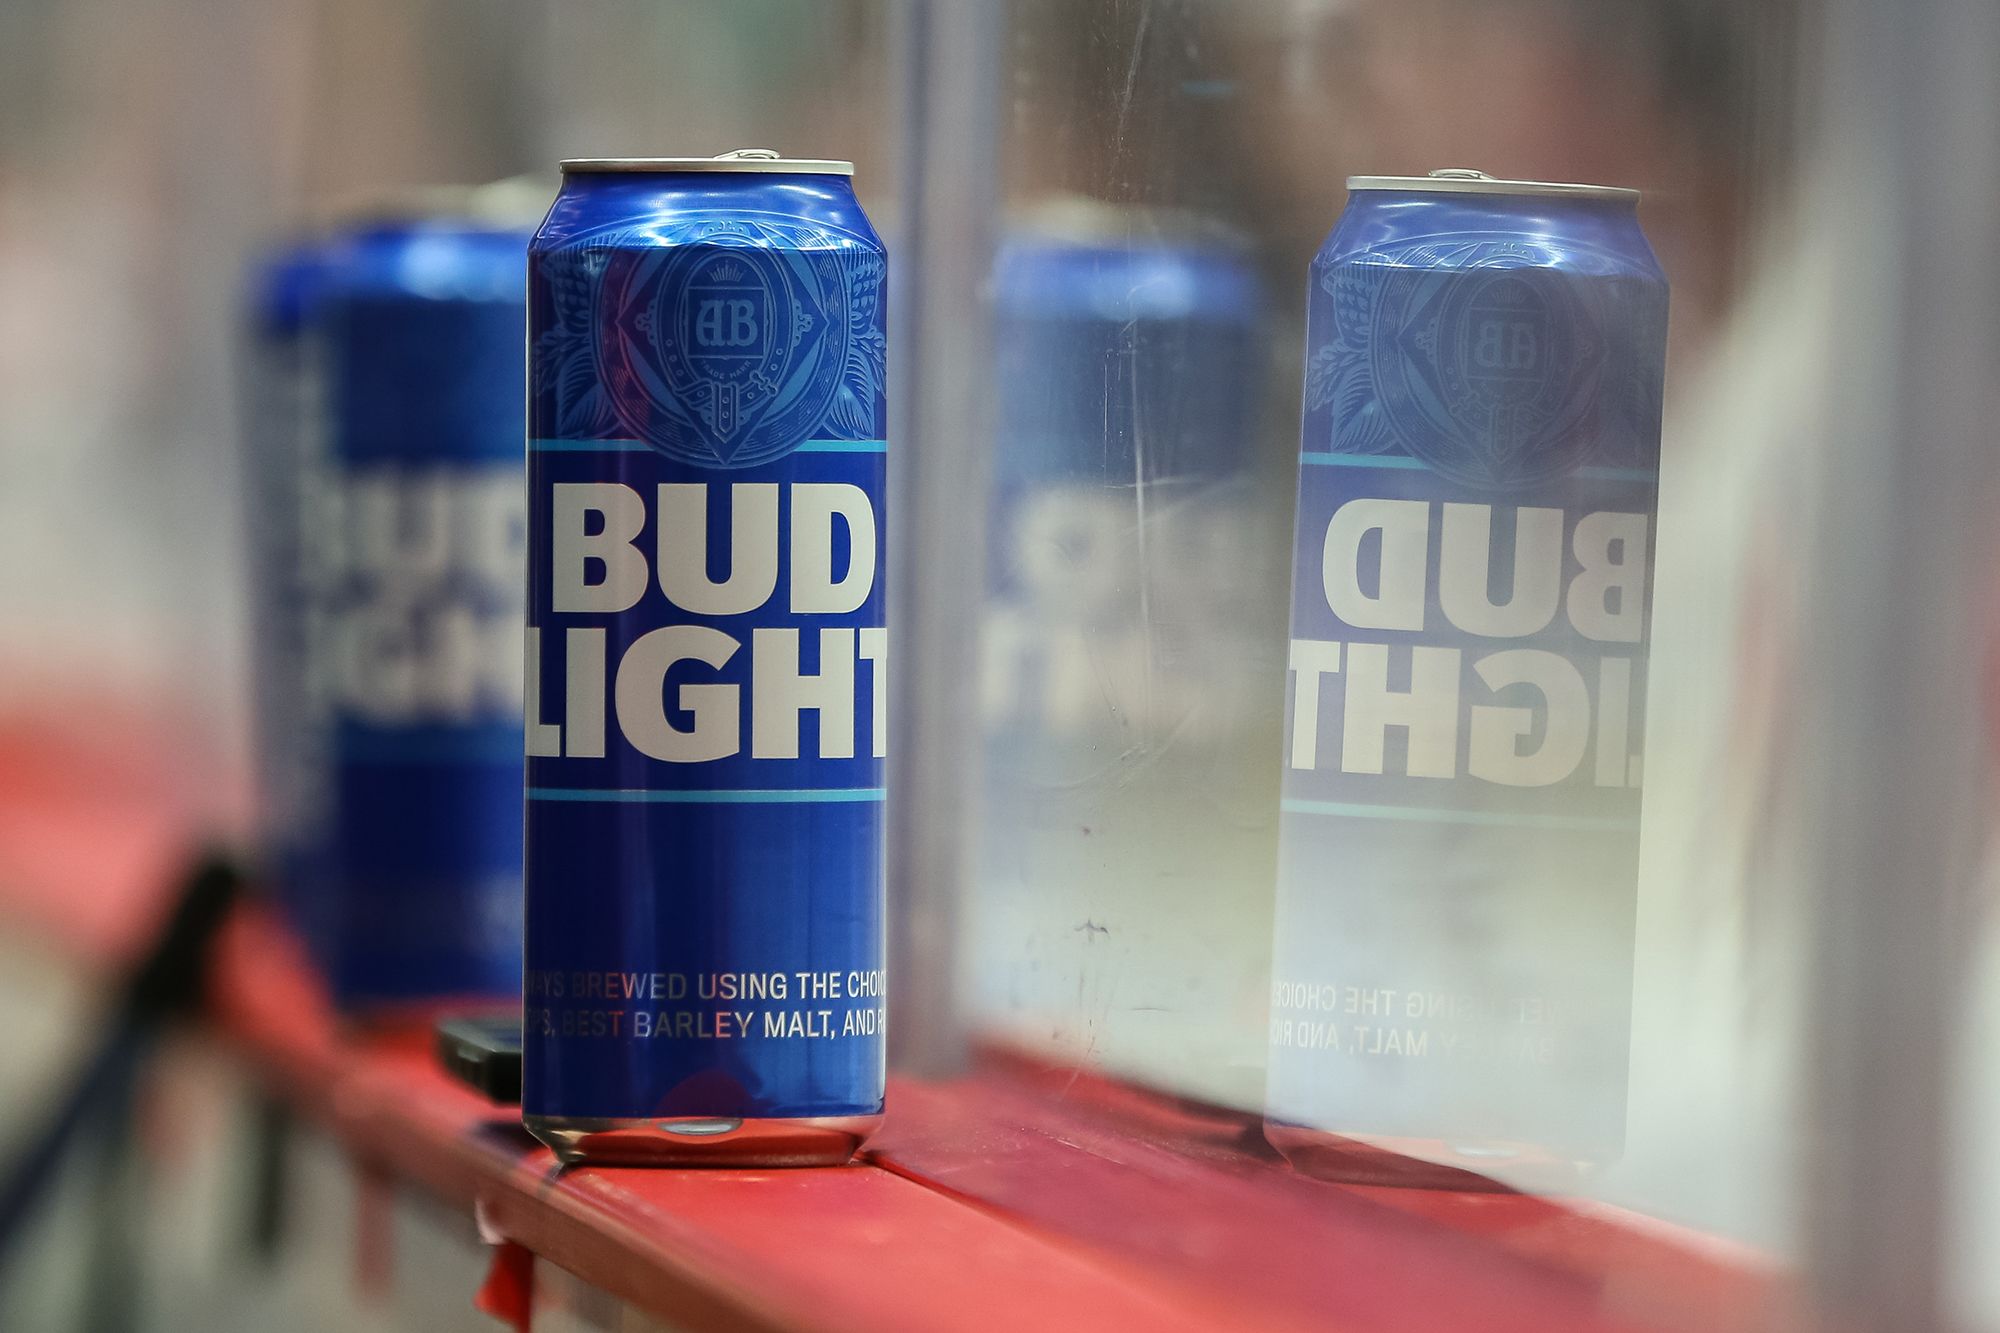 Bud Light apologizes for 'removing no' label